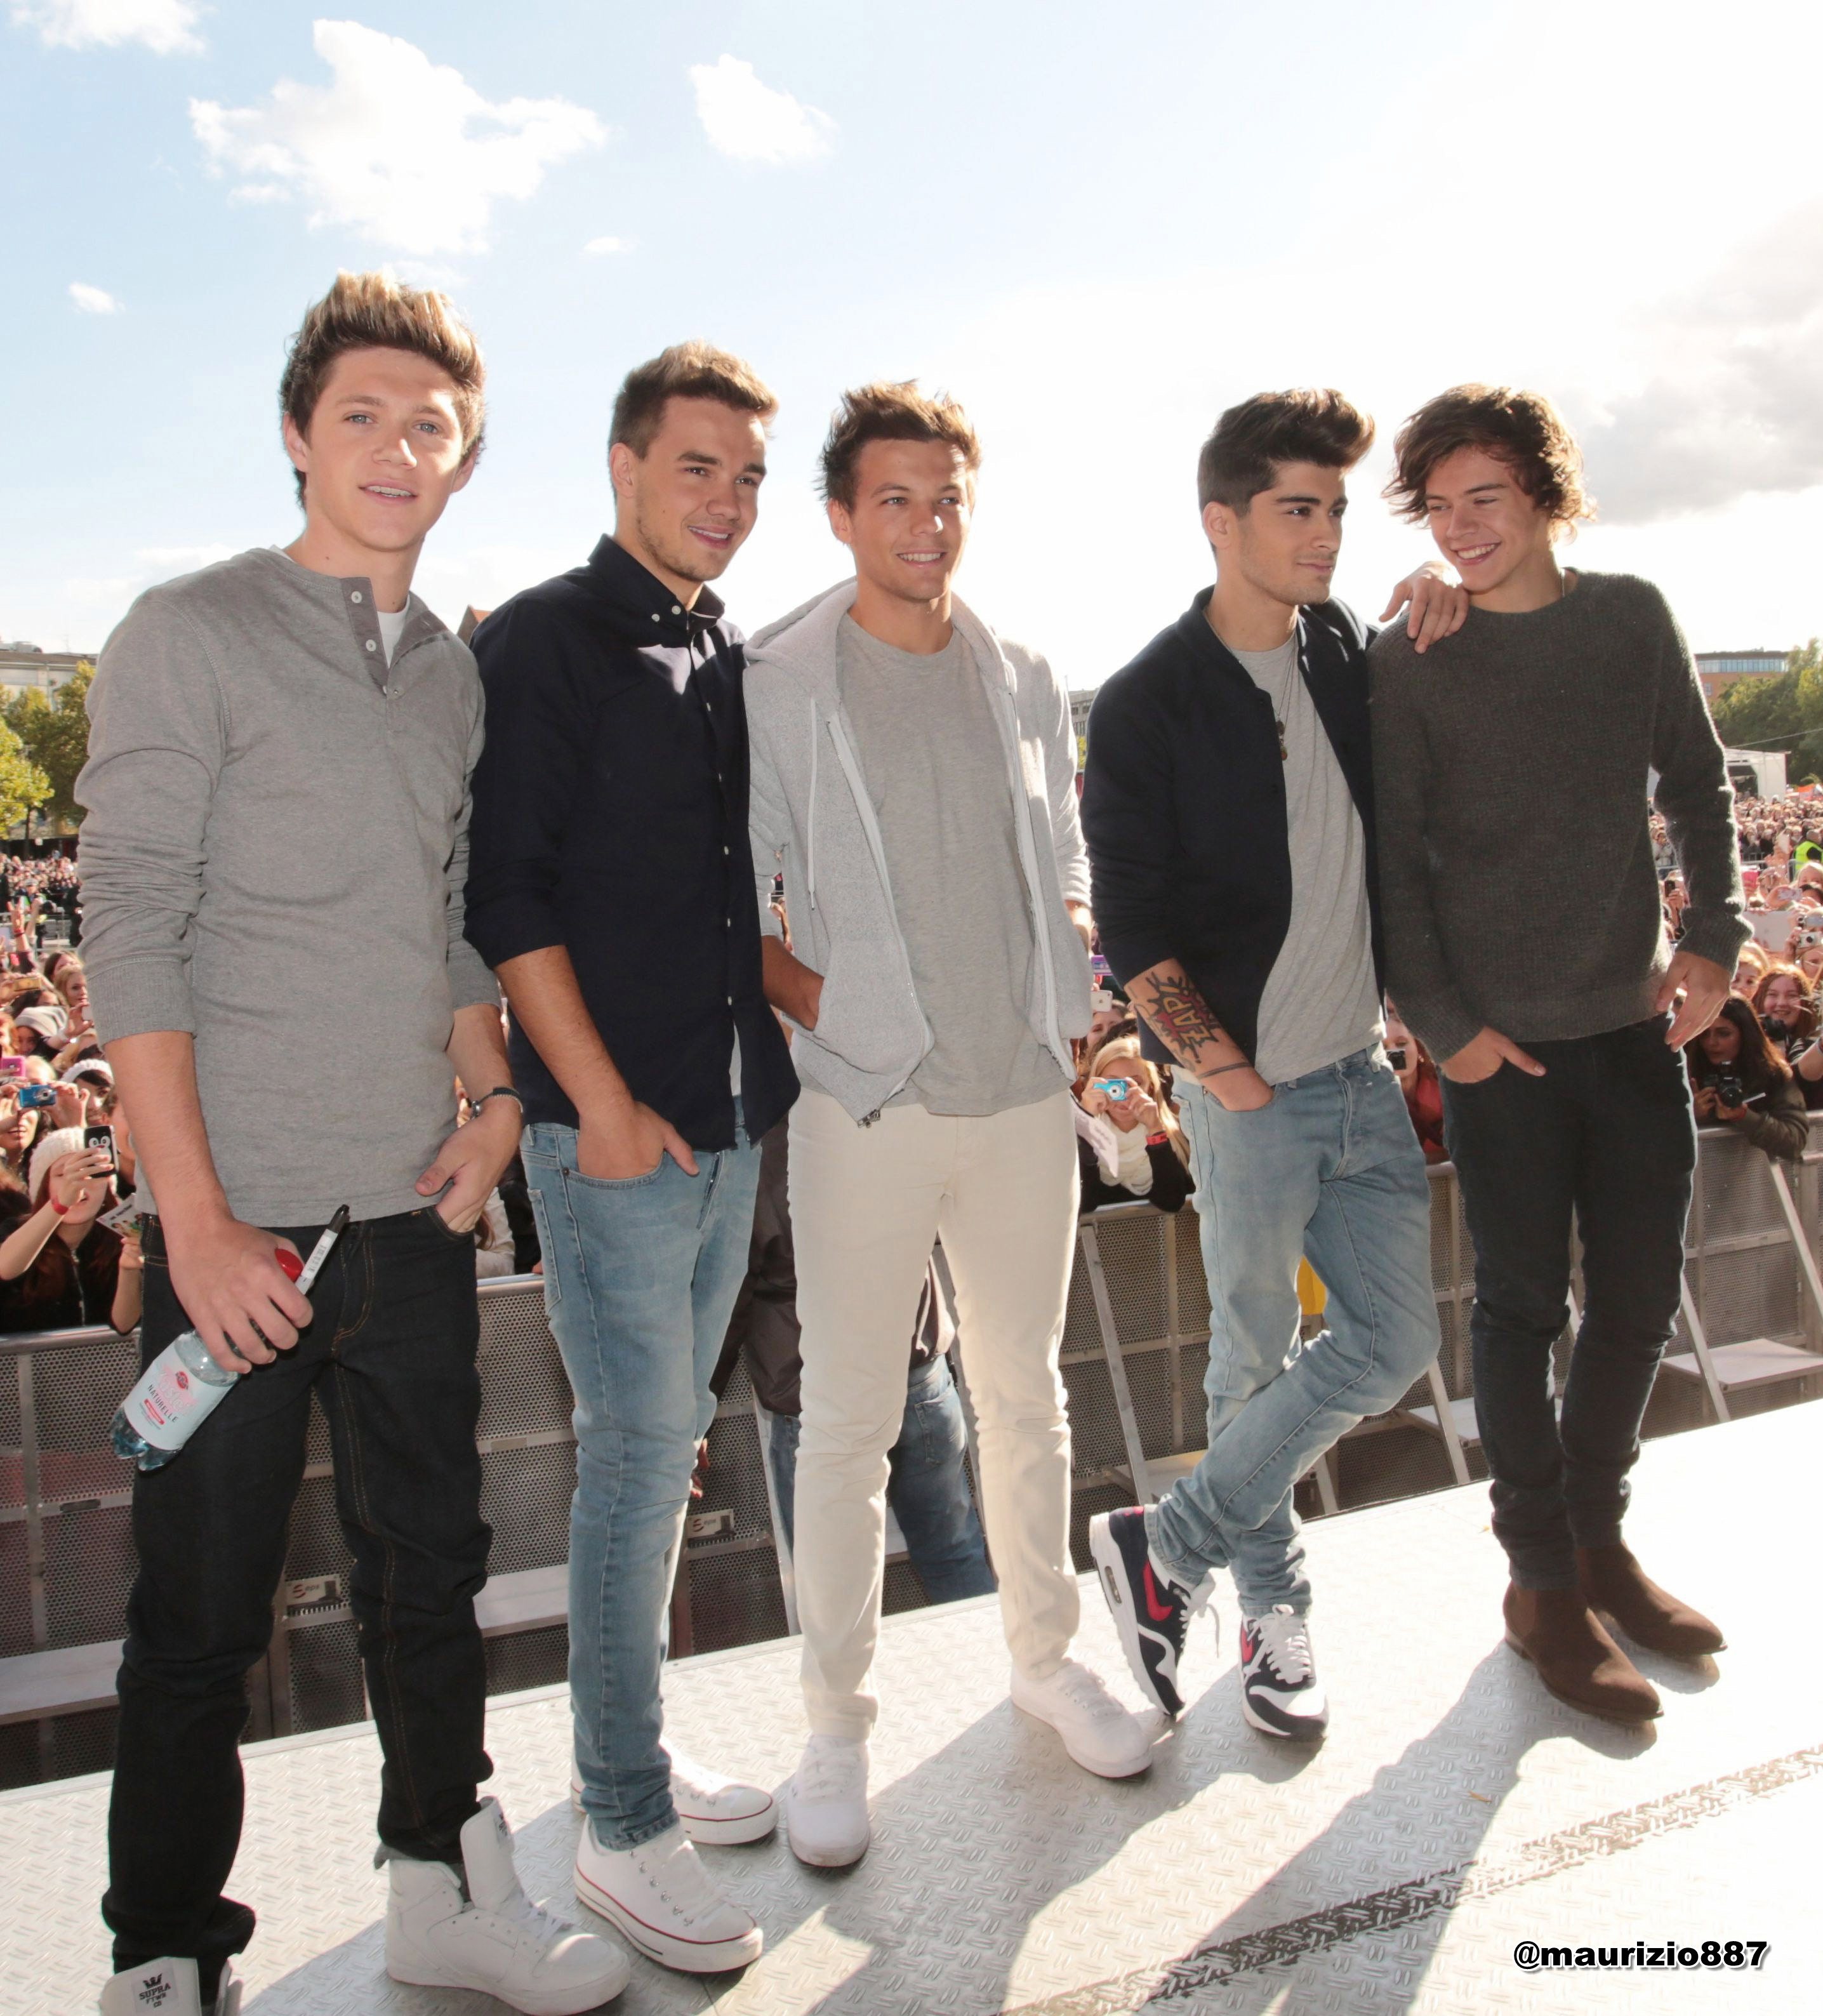 one direction,Cologne, Germany 22 sept 2012 - One Direction Photo ...